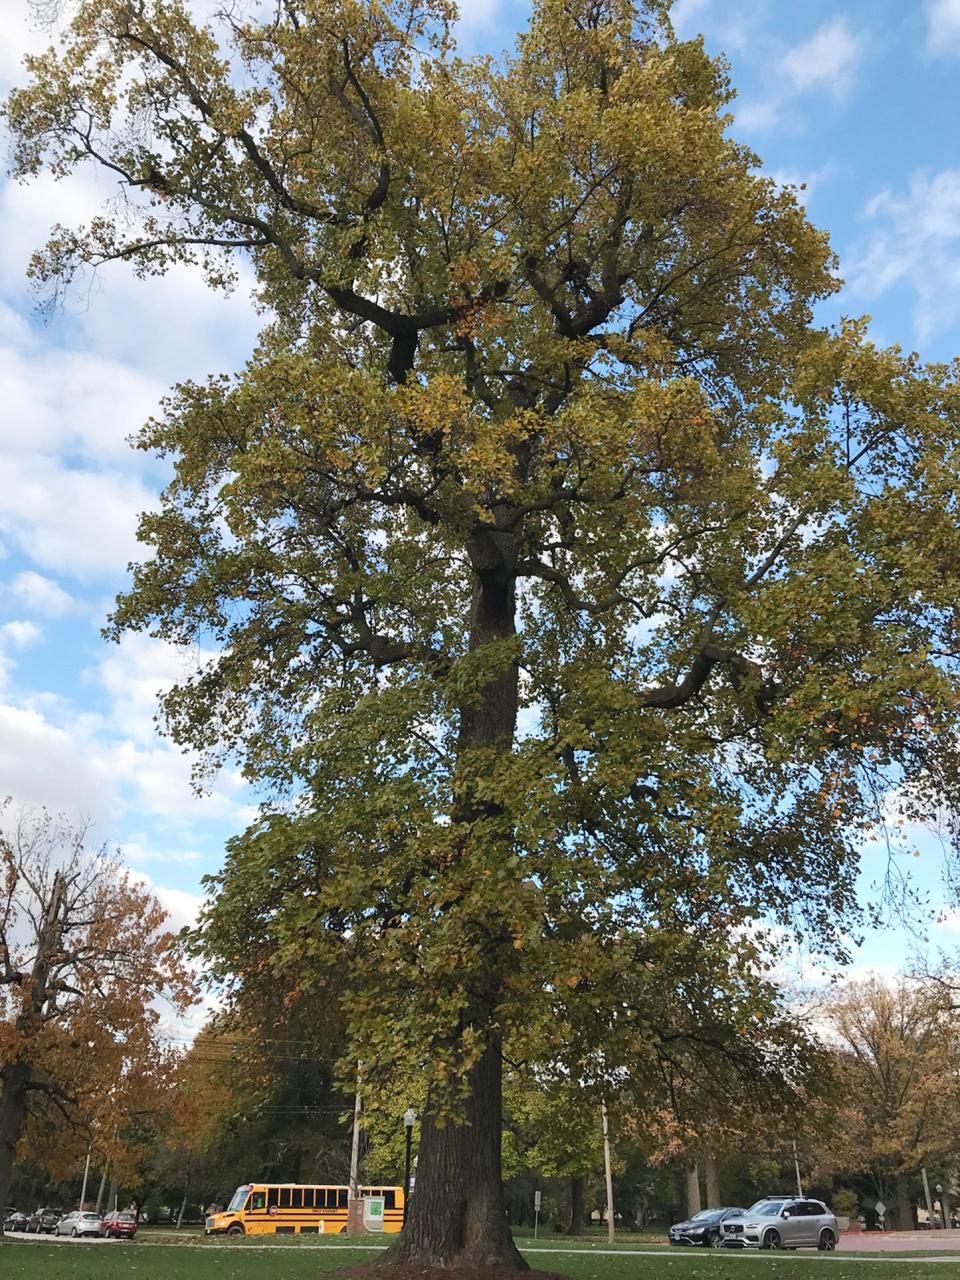 This tuliptree on the Knox College campus is one of arborist Charlie Goodrich’s favorite trees in Galesburg. The tree is massive, with a trunk 60 inches in diameter.